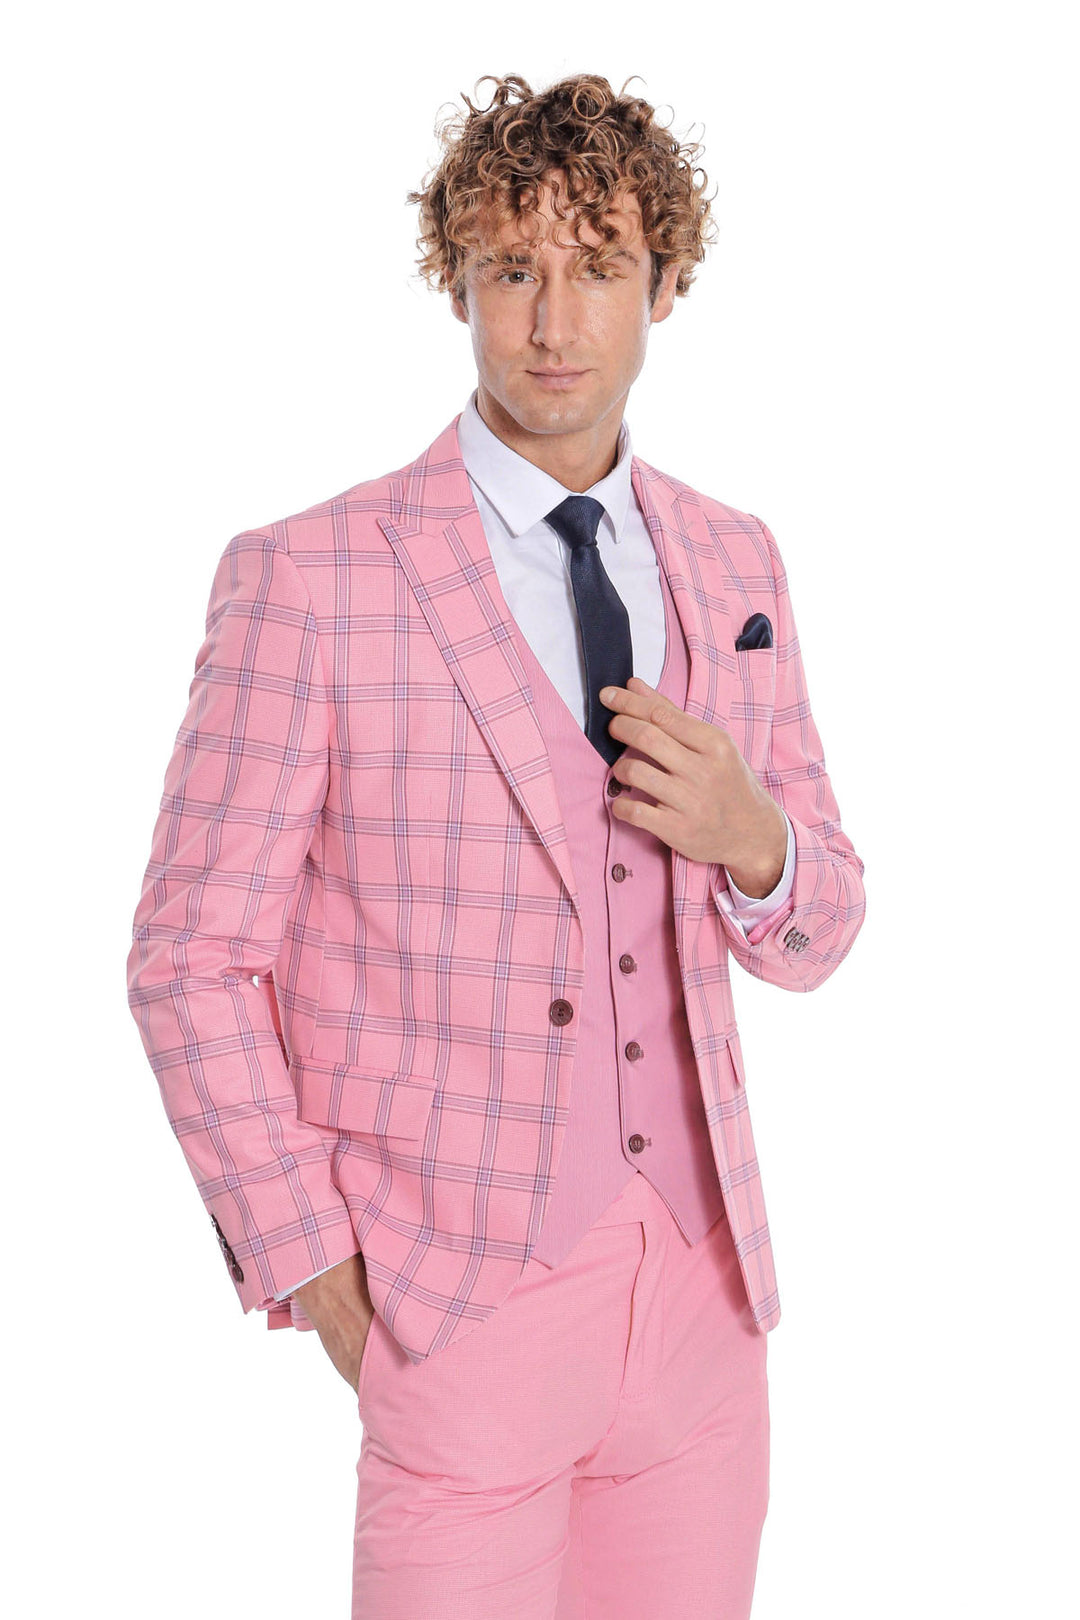 Checked Patterned Slim Fit Pink Men Suit - Wessi